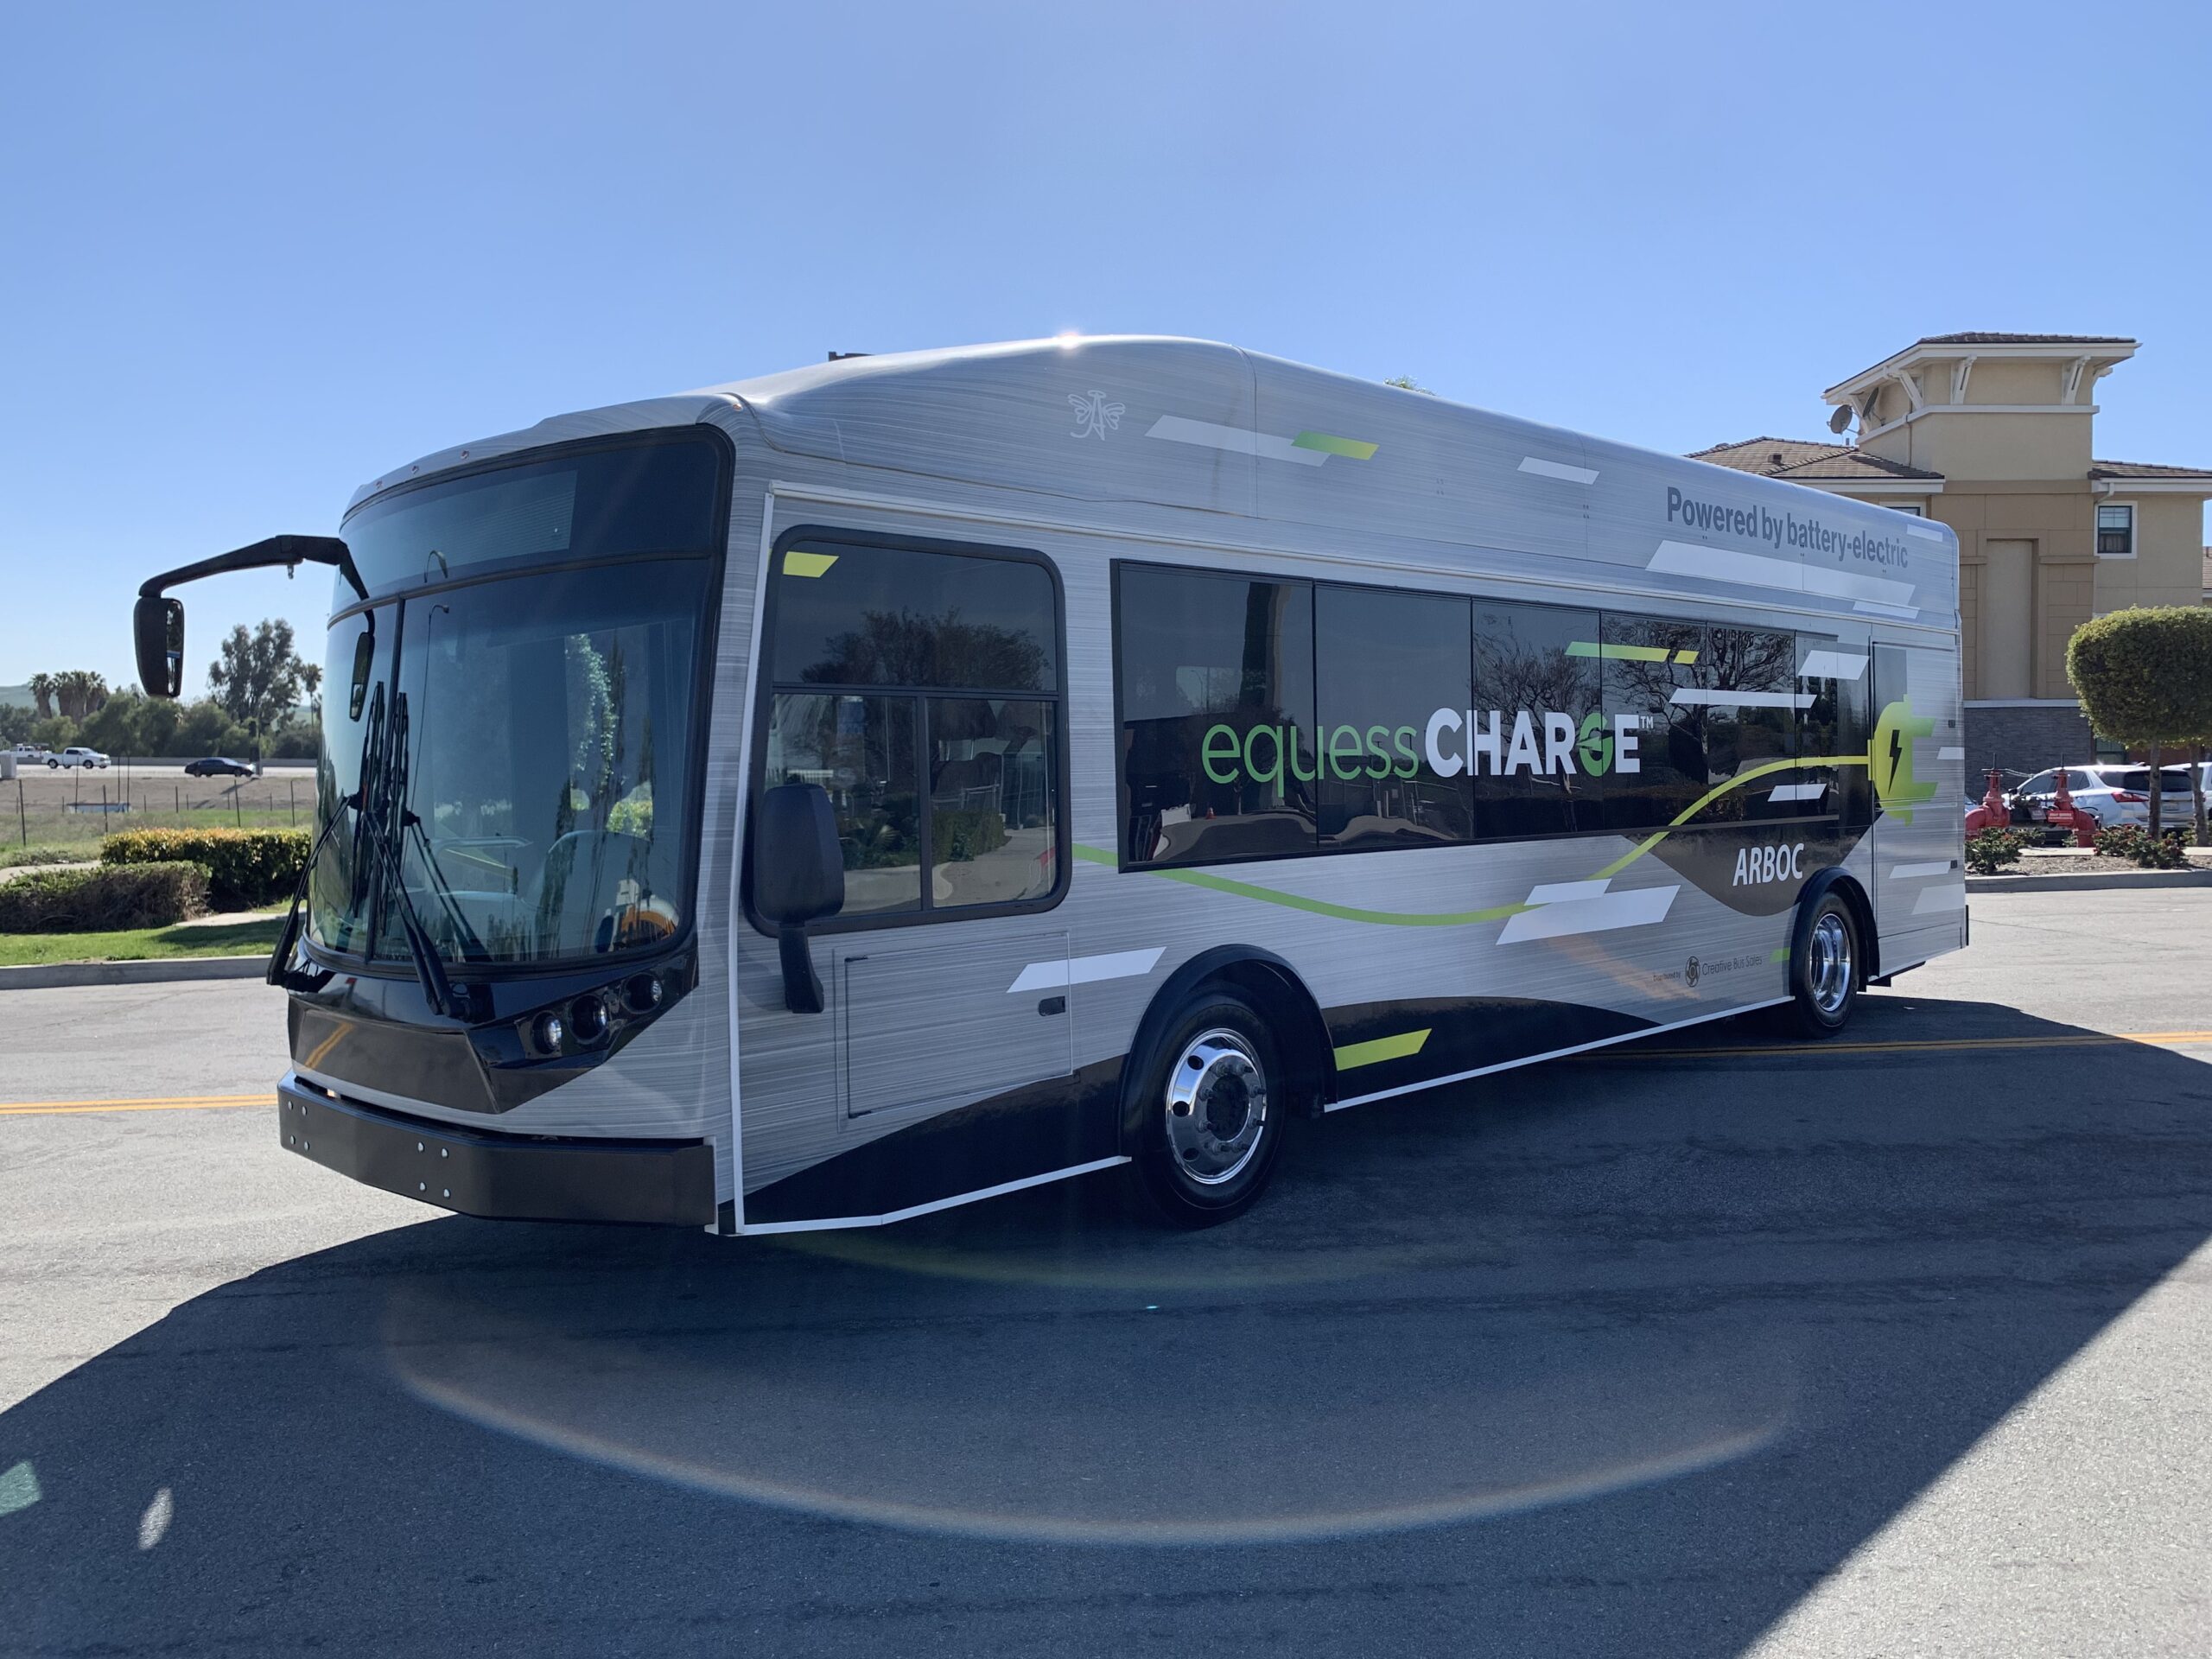 A 2021 electric bus parked in a parking lot.